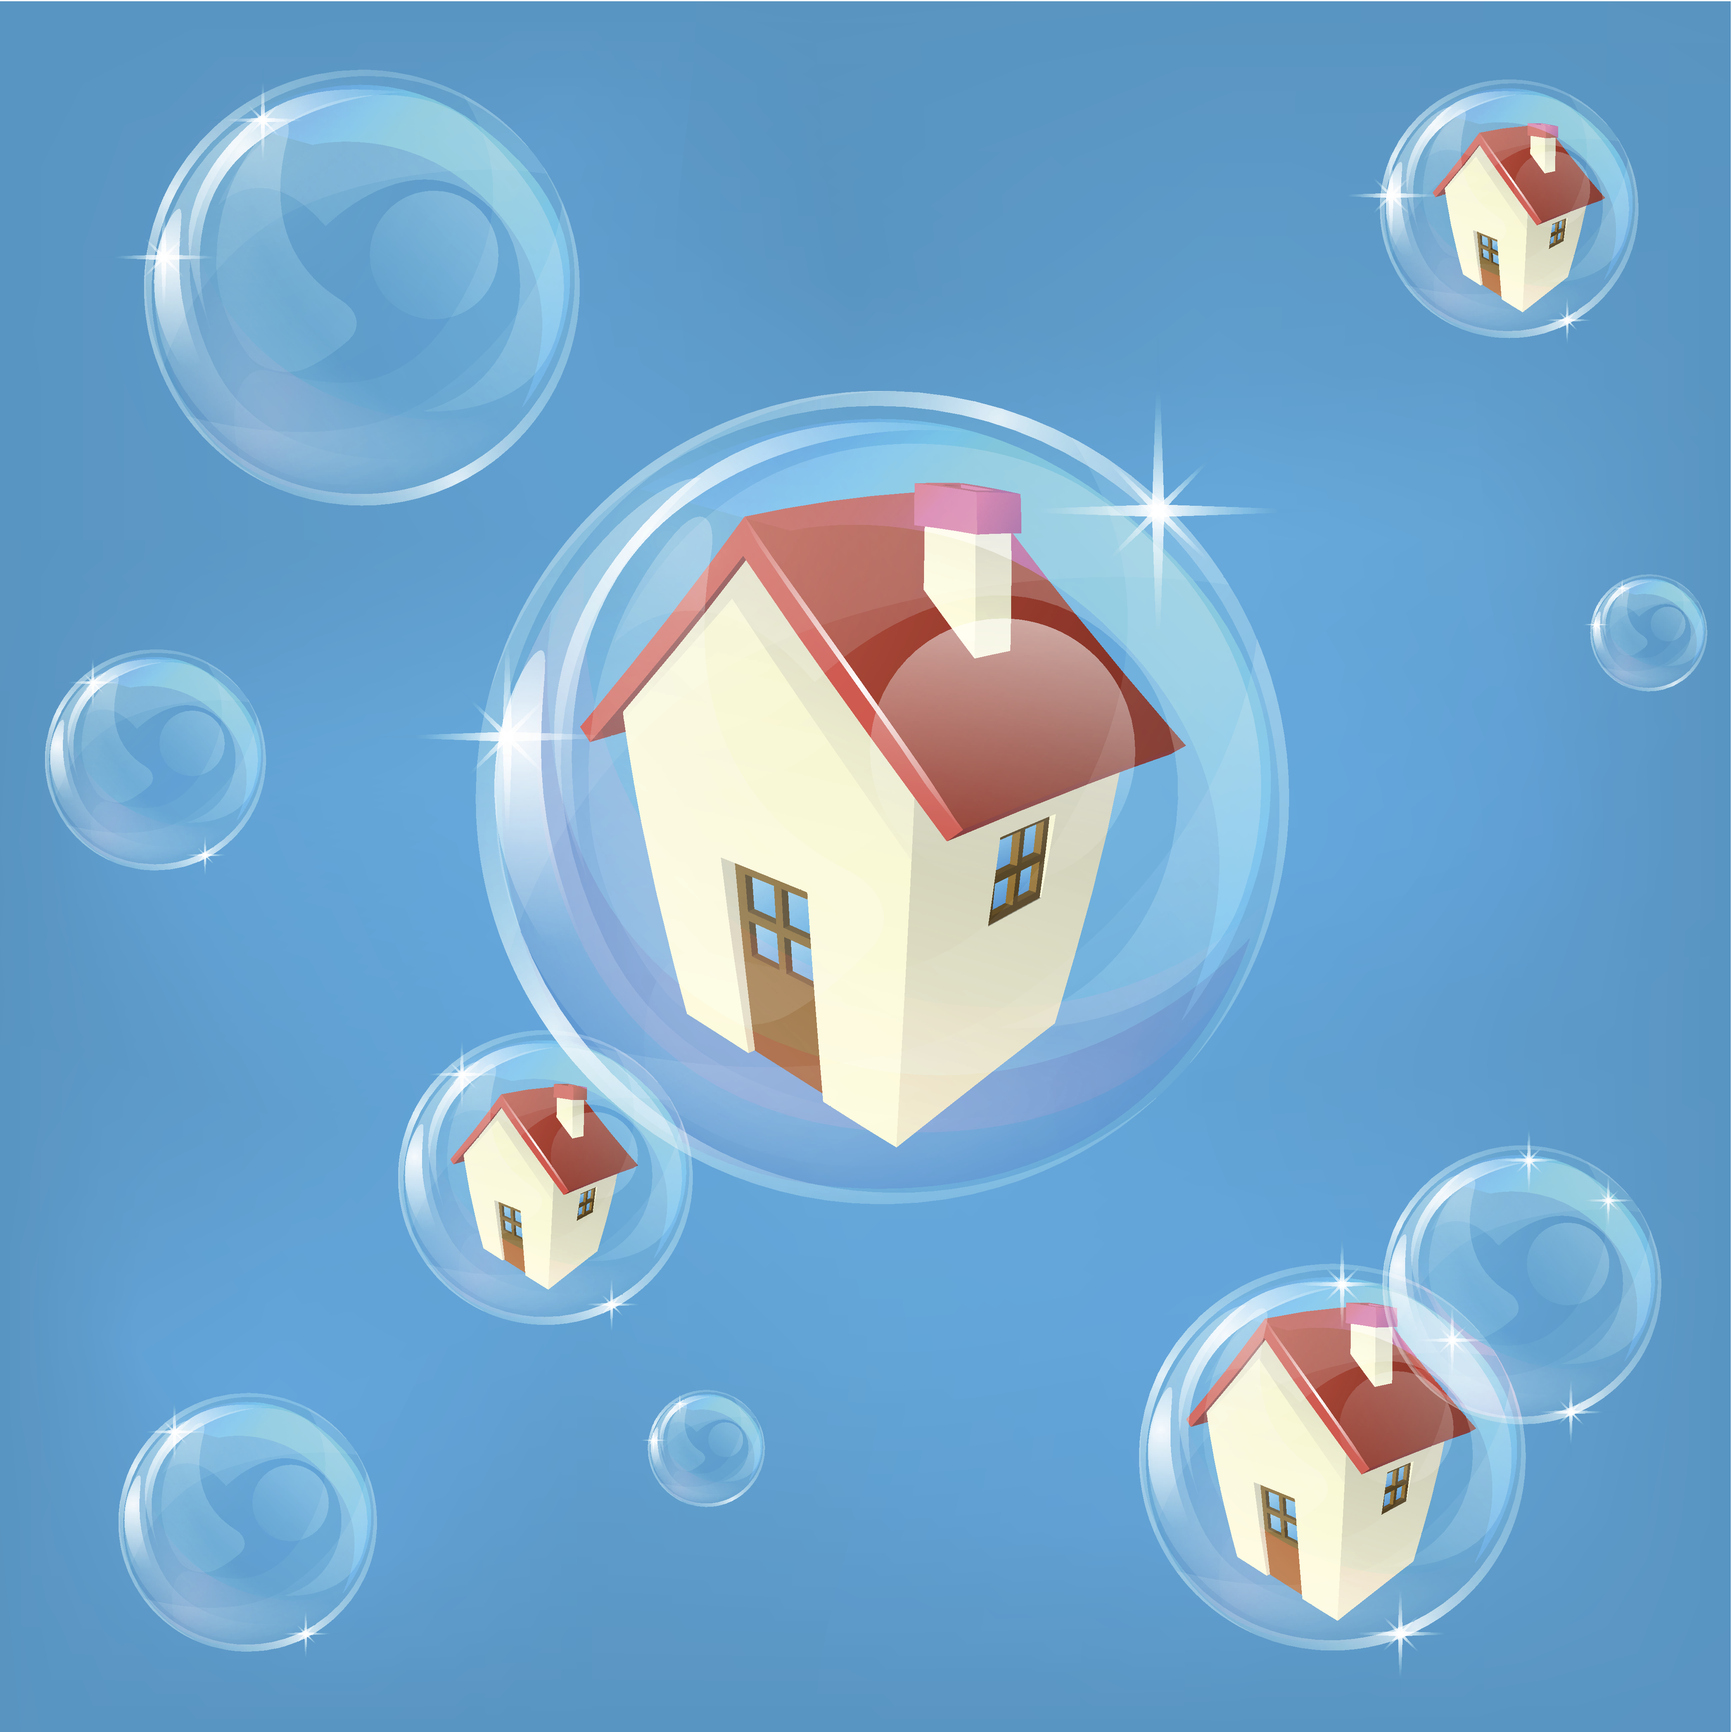 Is The Real Estate Bubble About To Pop?